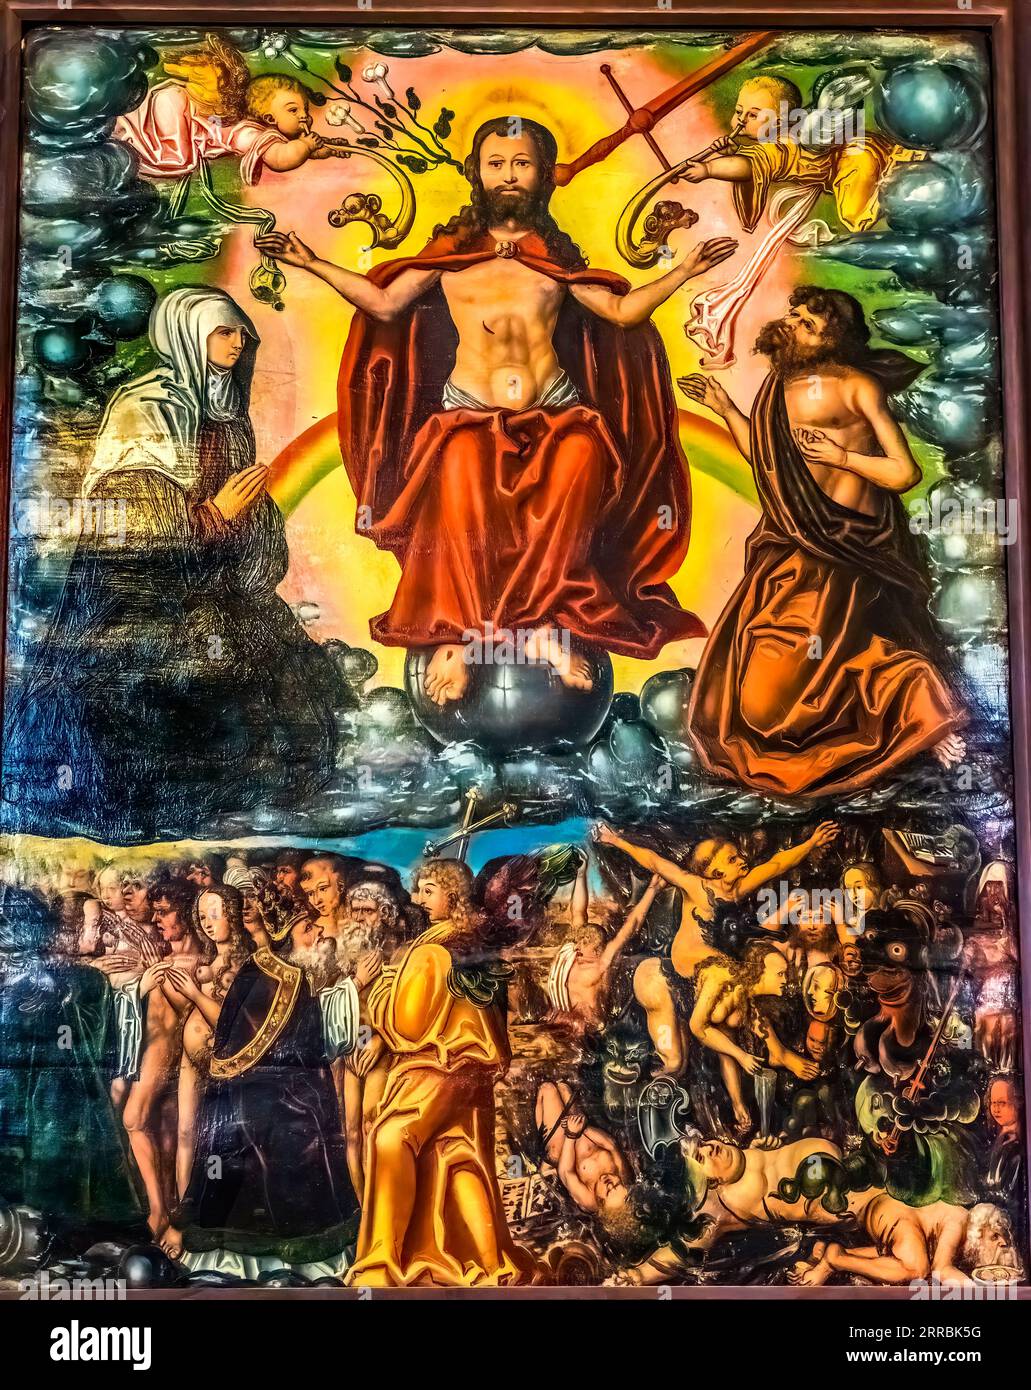 Last Judgement Medieval Painting St Mary's Church Berlin Germany.  Date from late 1200s, became a Protestant church in 1539. Oldest church in Berlin. Stock Photo